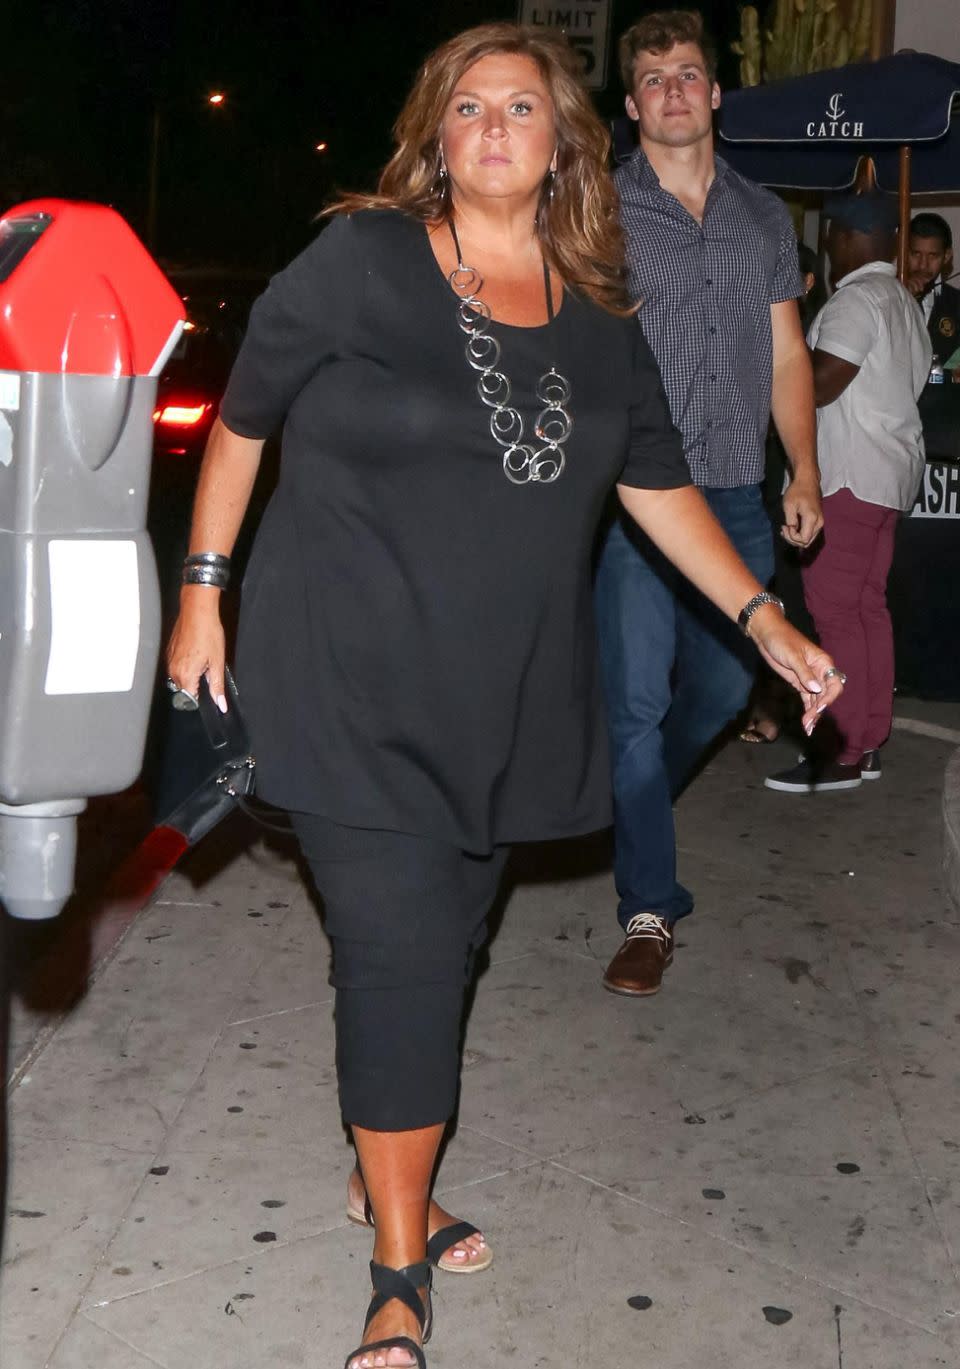 Abby Lee Miller entered prison back in July to serve her 366-day sentence. She is pictured here before entering jail in June. Source: Getty